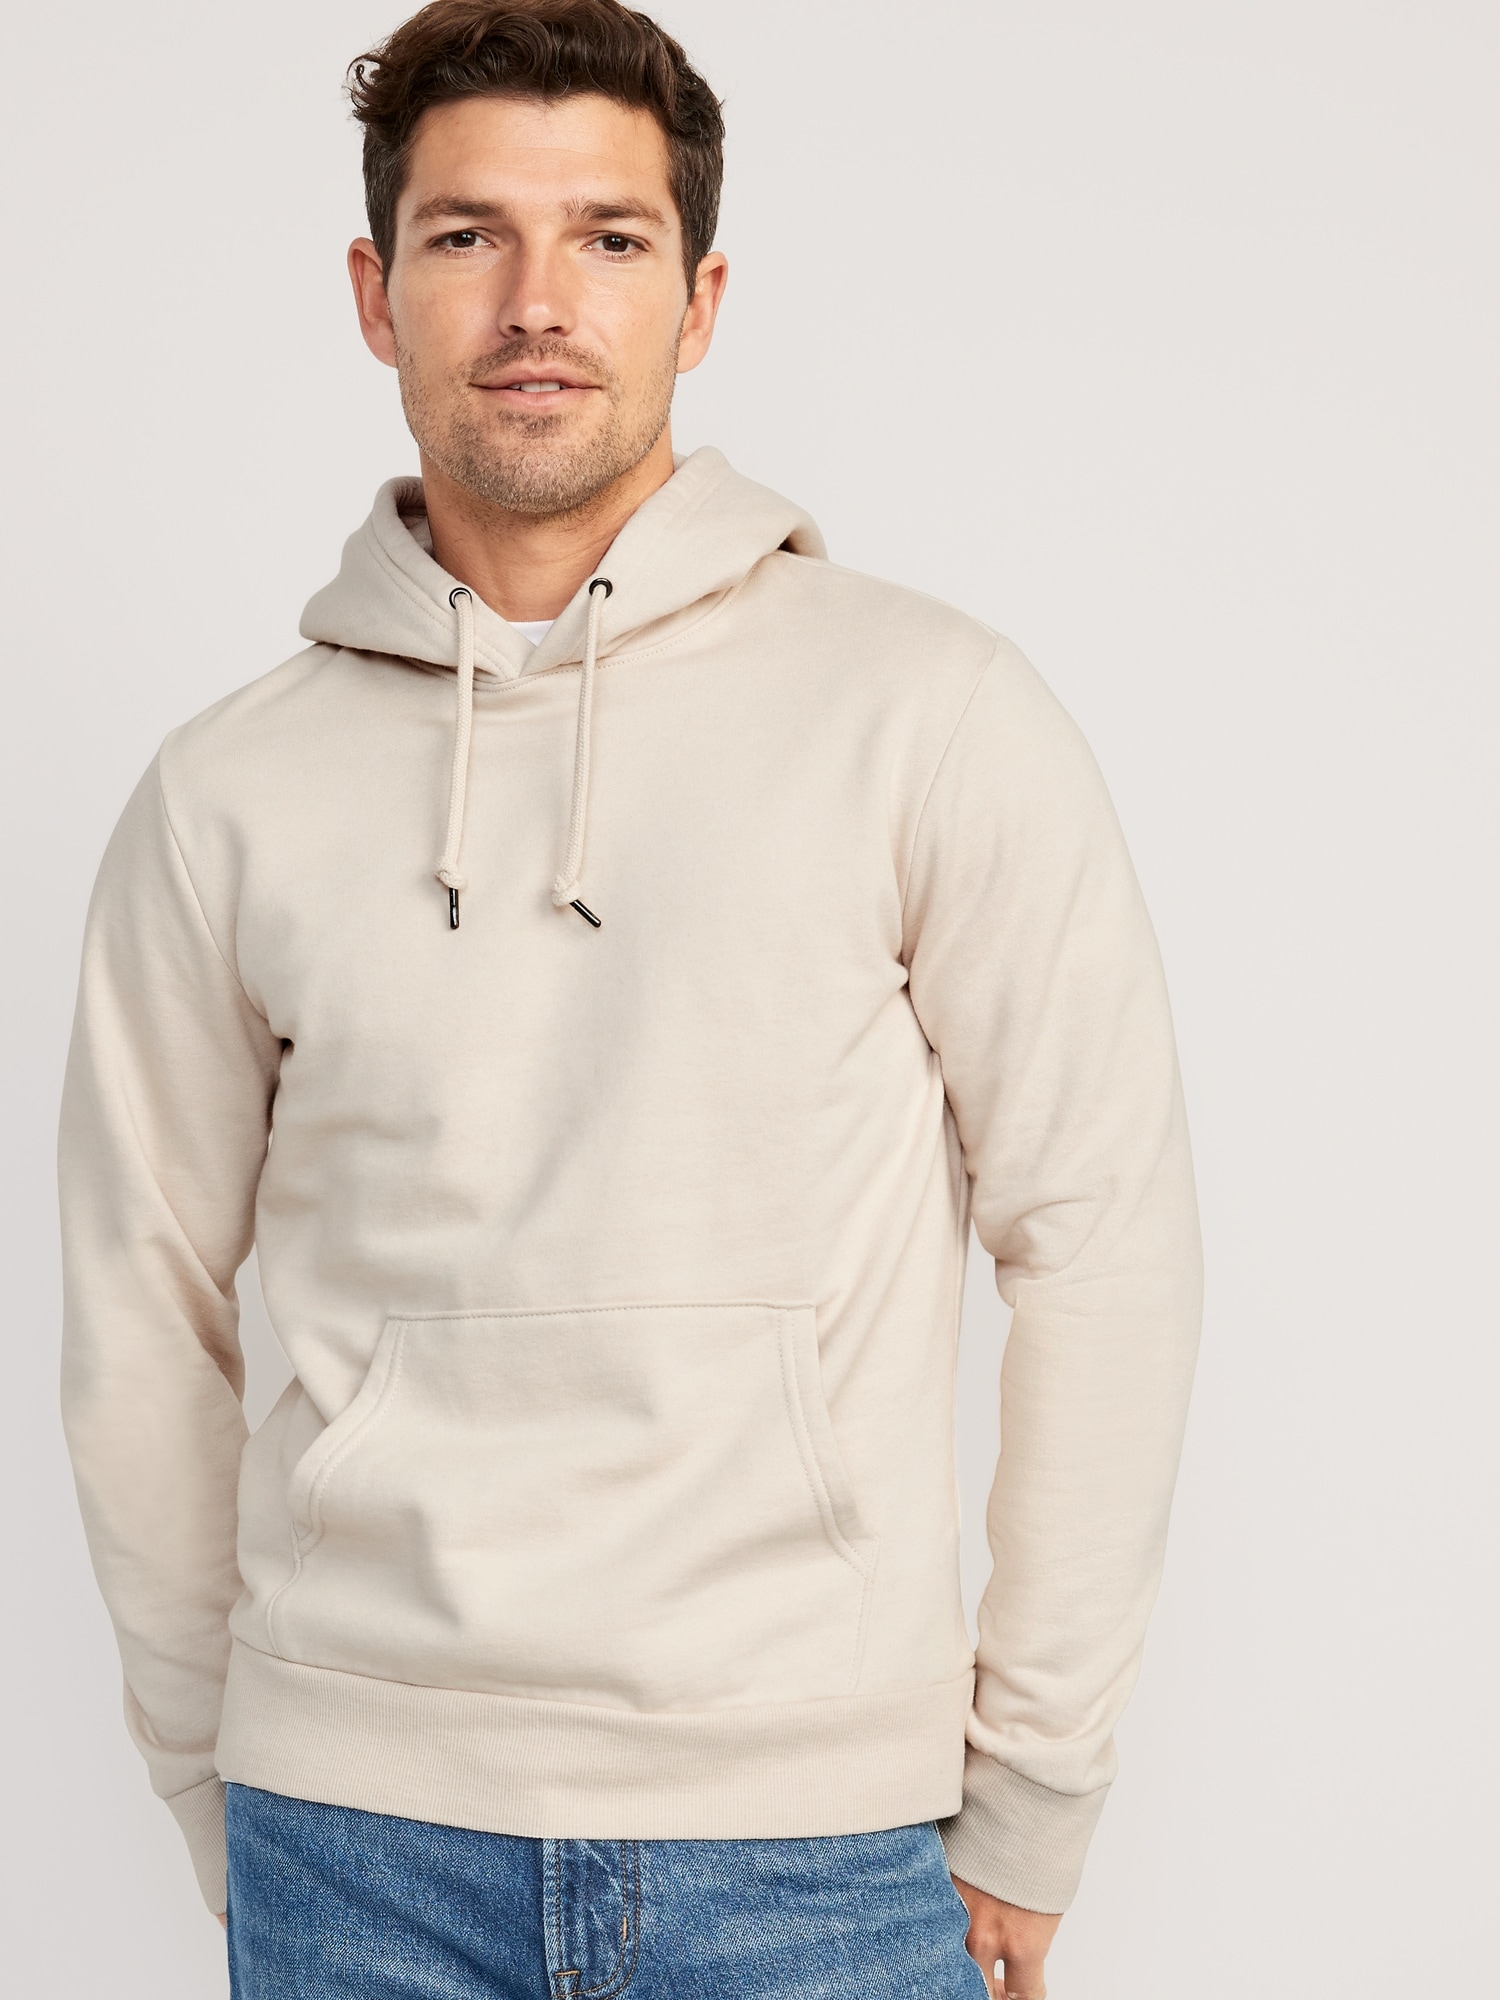 Old Navy Classic Pullover Hoodie for Men beige. 1